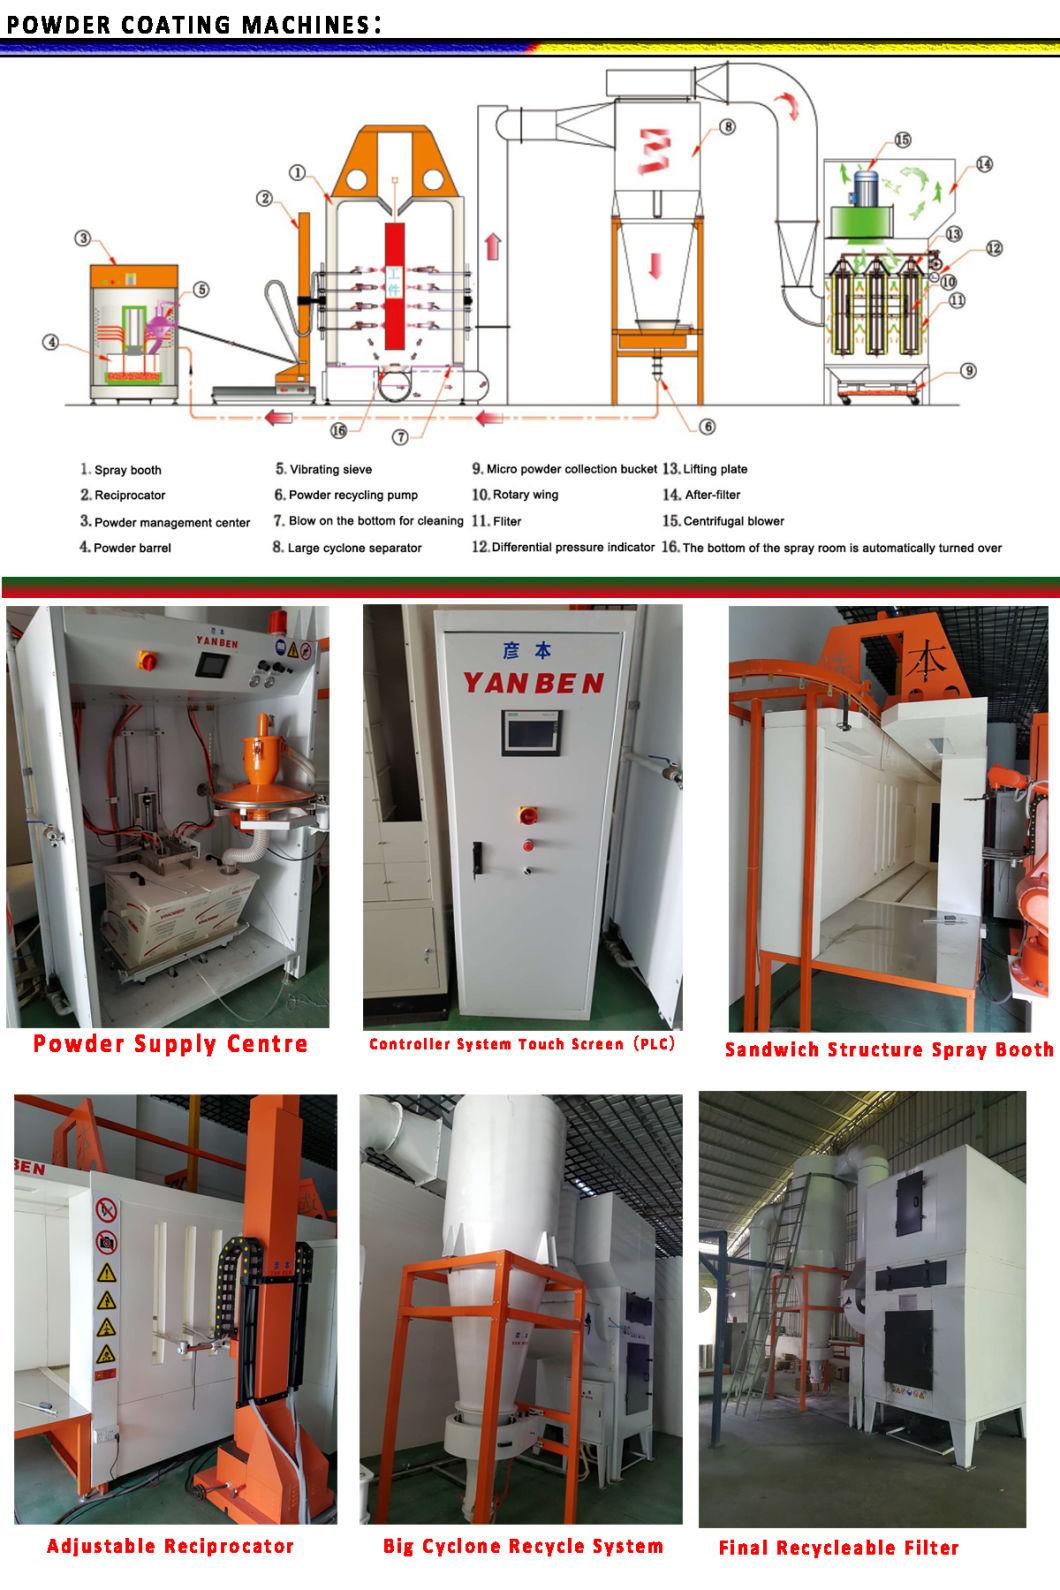 Automatic Reciprocator of Powder Coating Equipment System with Spray Gun